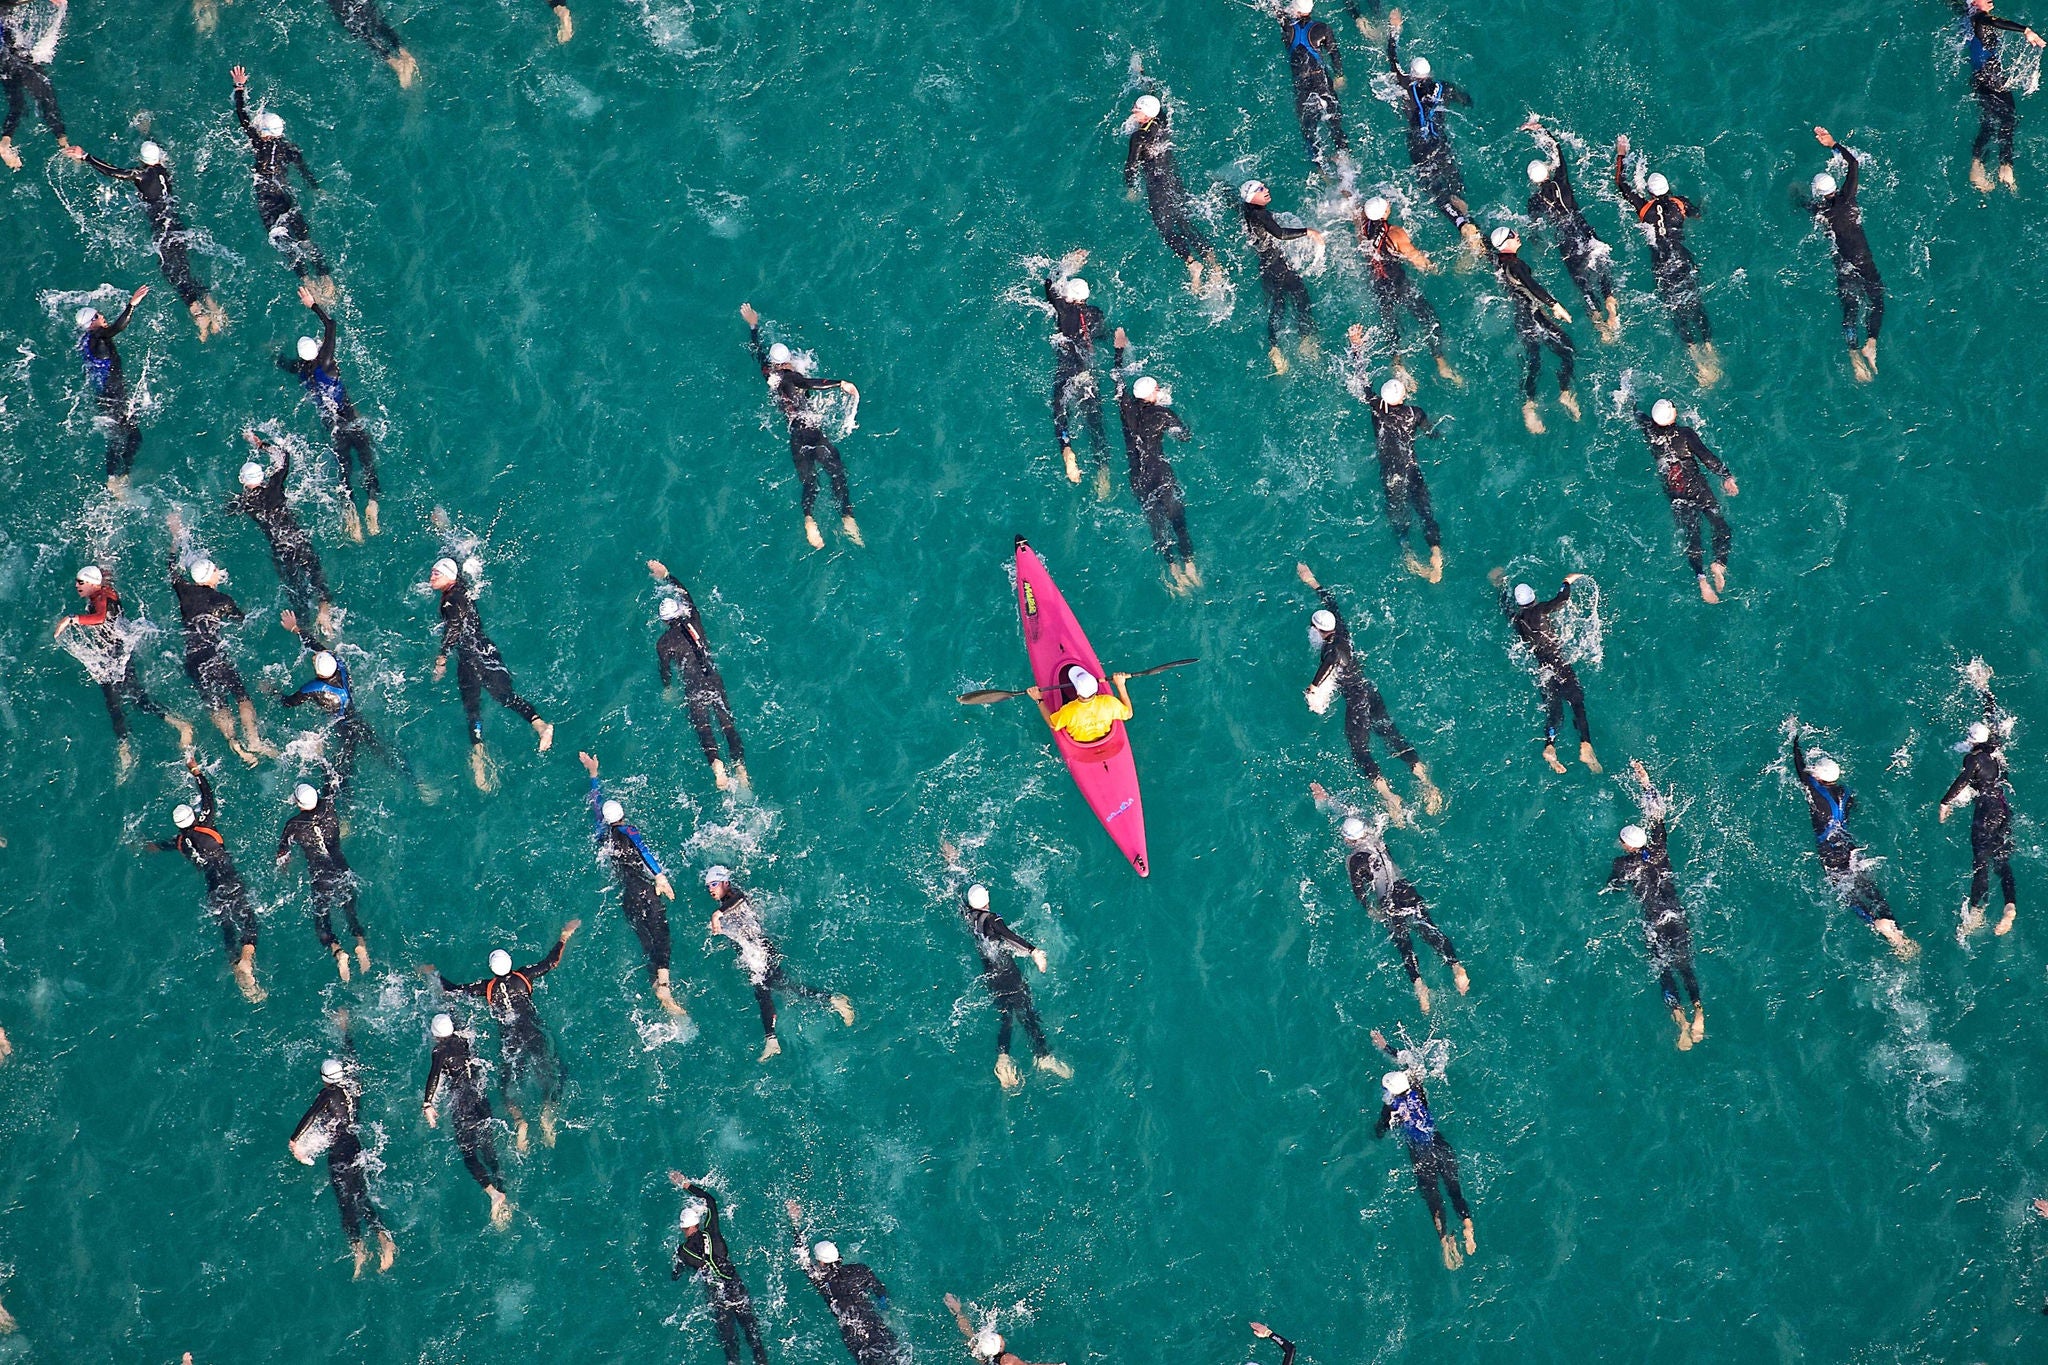 swim at Ironman Austria. from helicopter.Ironman Austria long day picturing friends and pro's for Triangle.